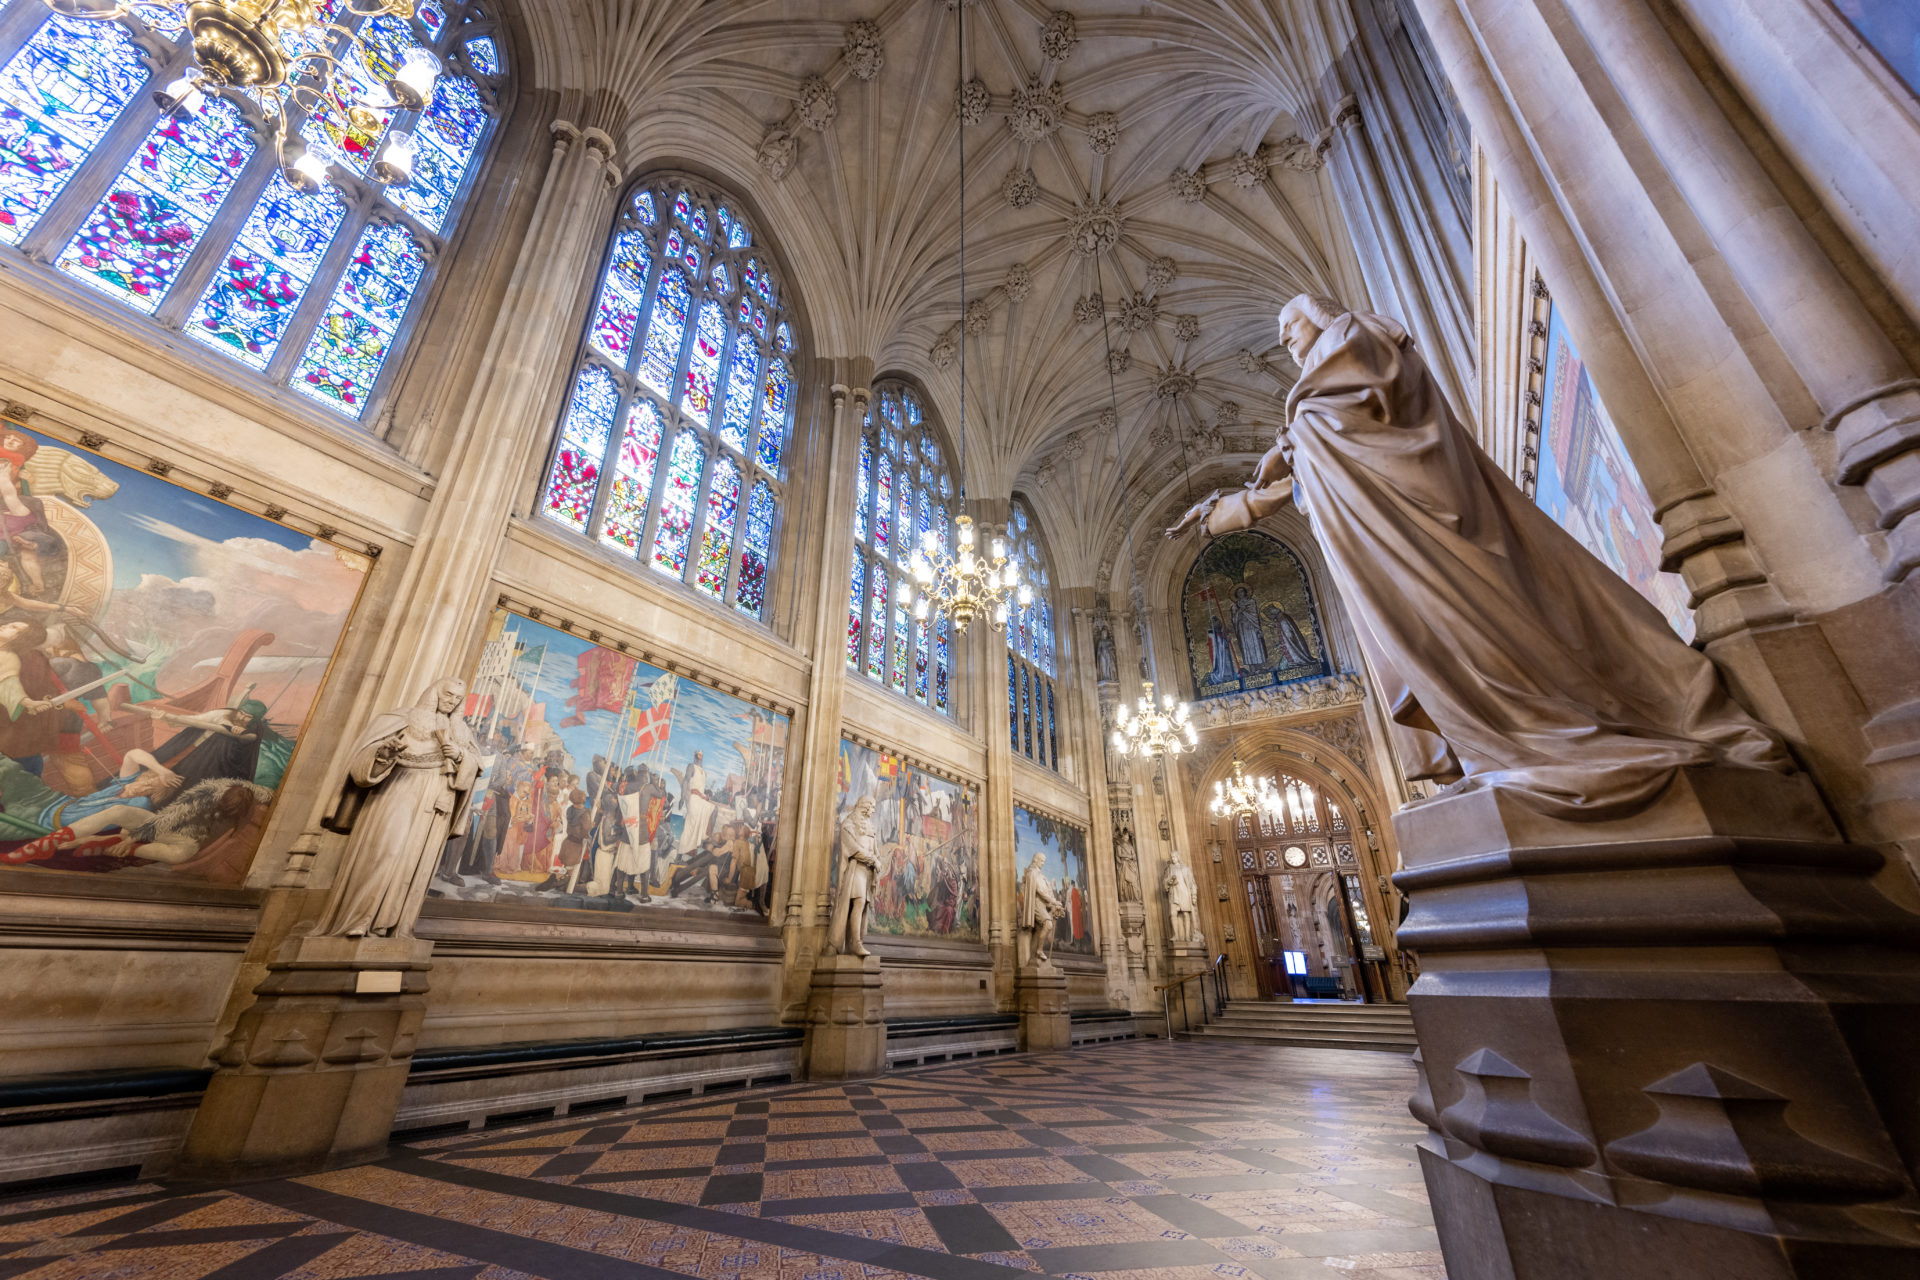 St Stephen's Hall after the completion of conservation works (Image: ©UK Parliament/Andy Bailey)